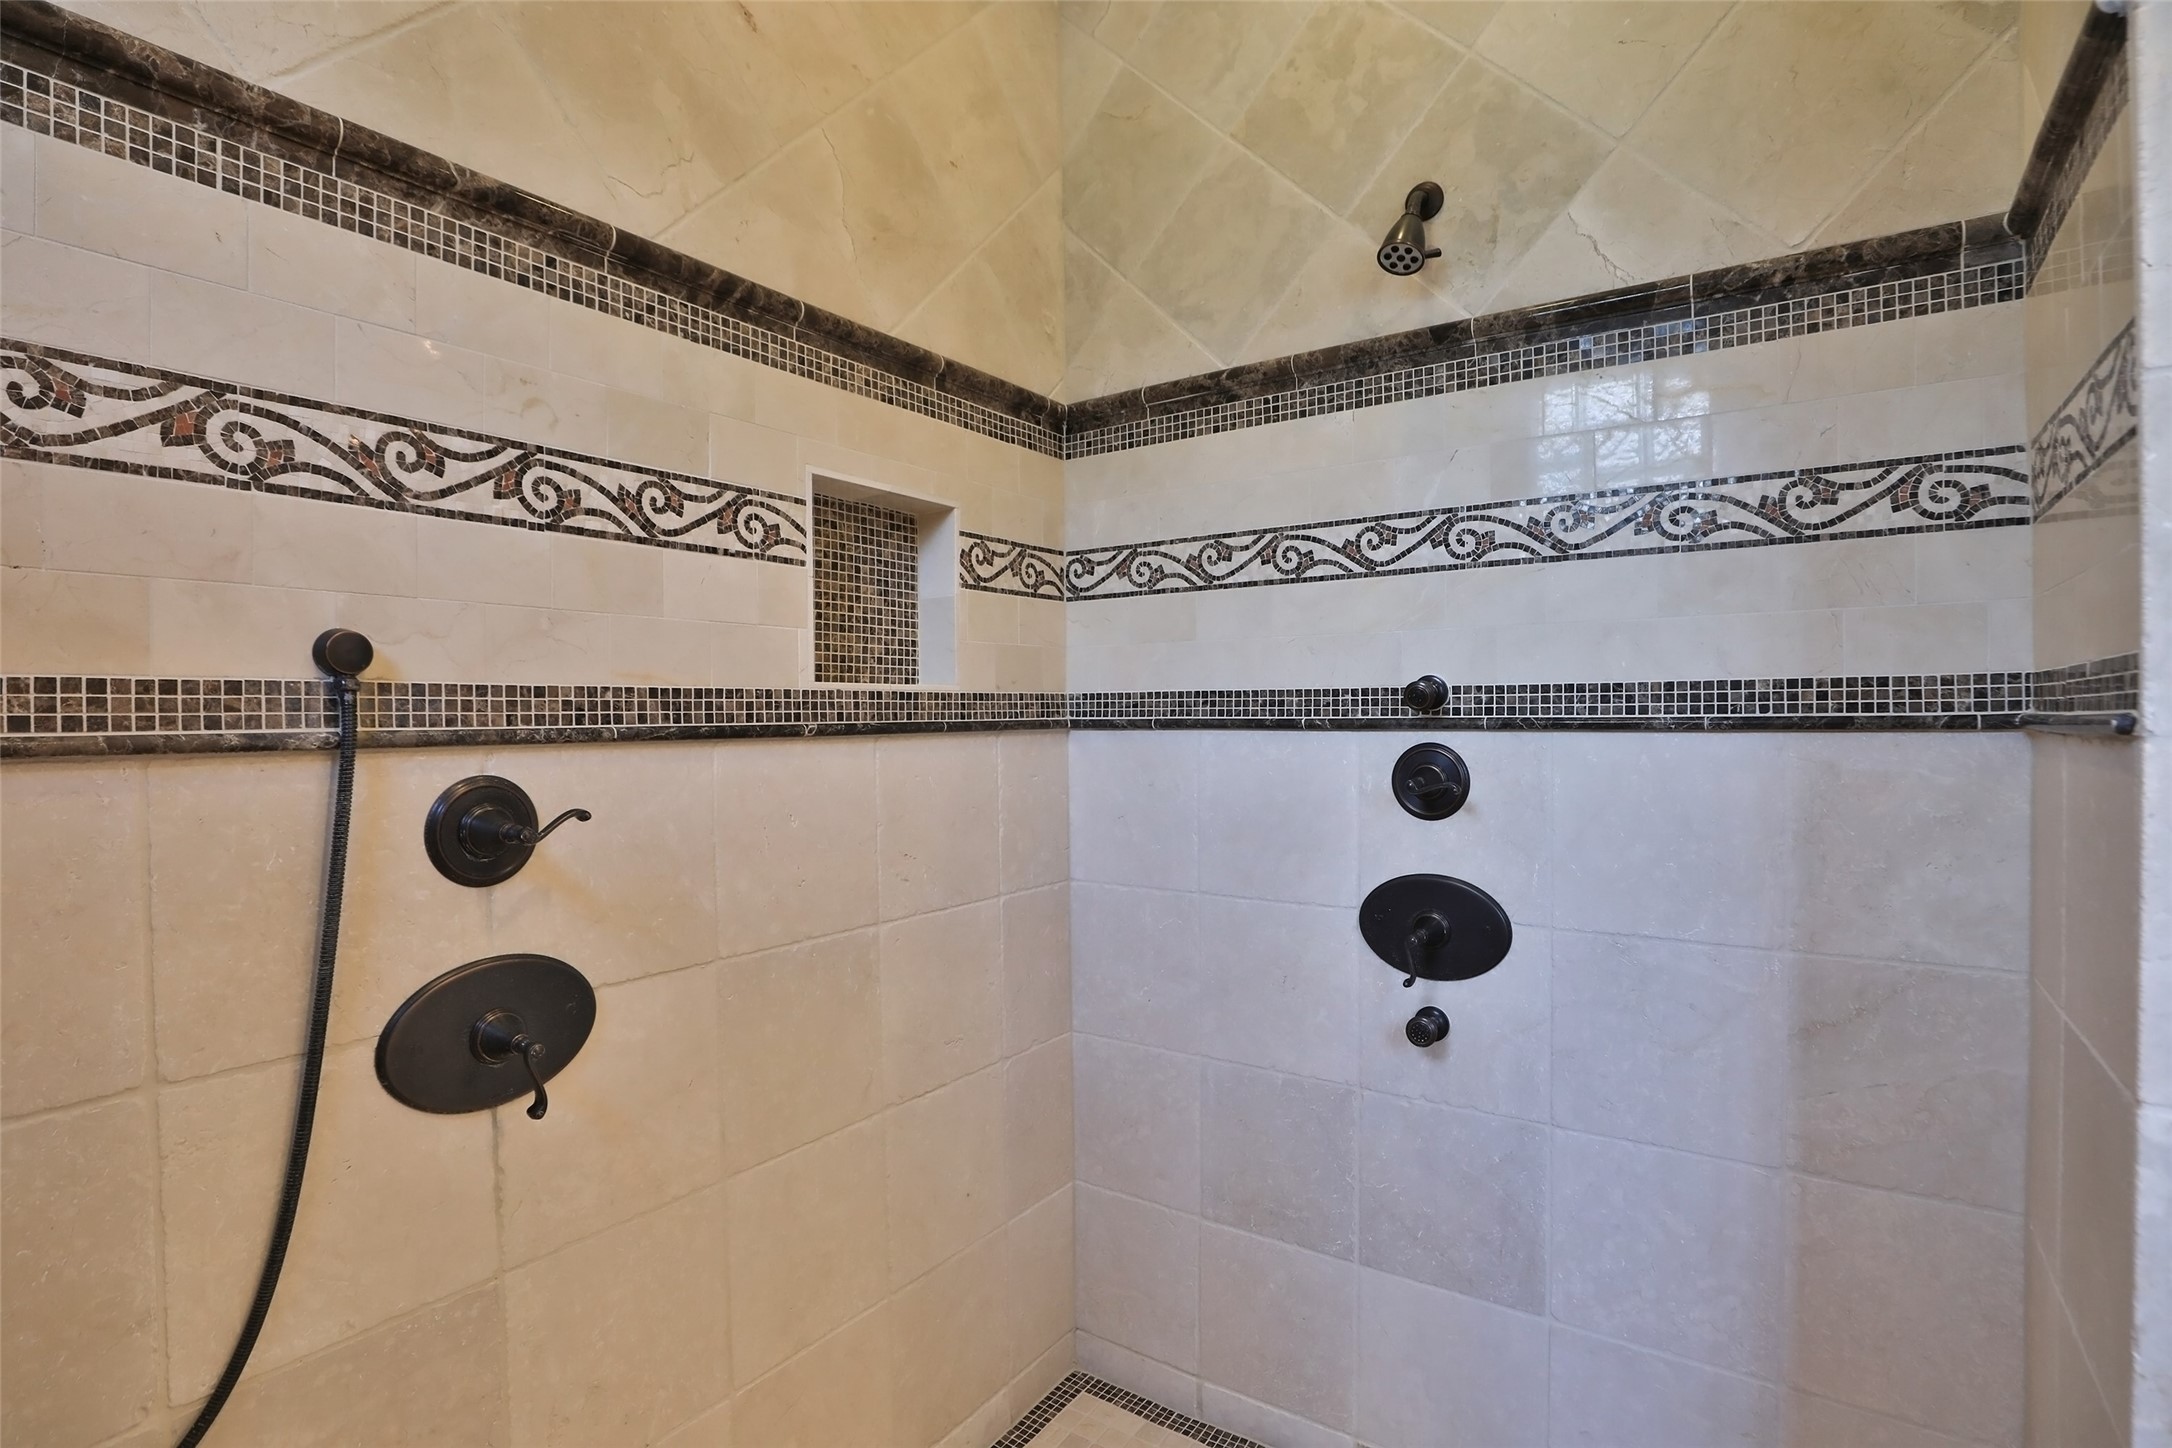 You will love this spacious walk in shower to relax in after long hard days. Beautifully designed with decorative tile and tile bottom.